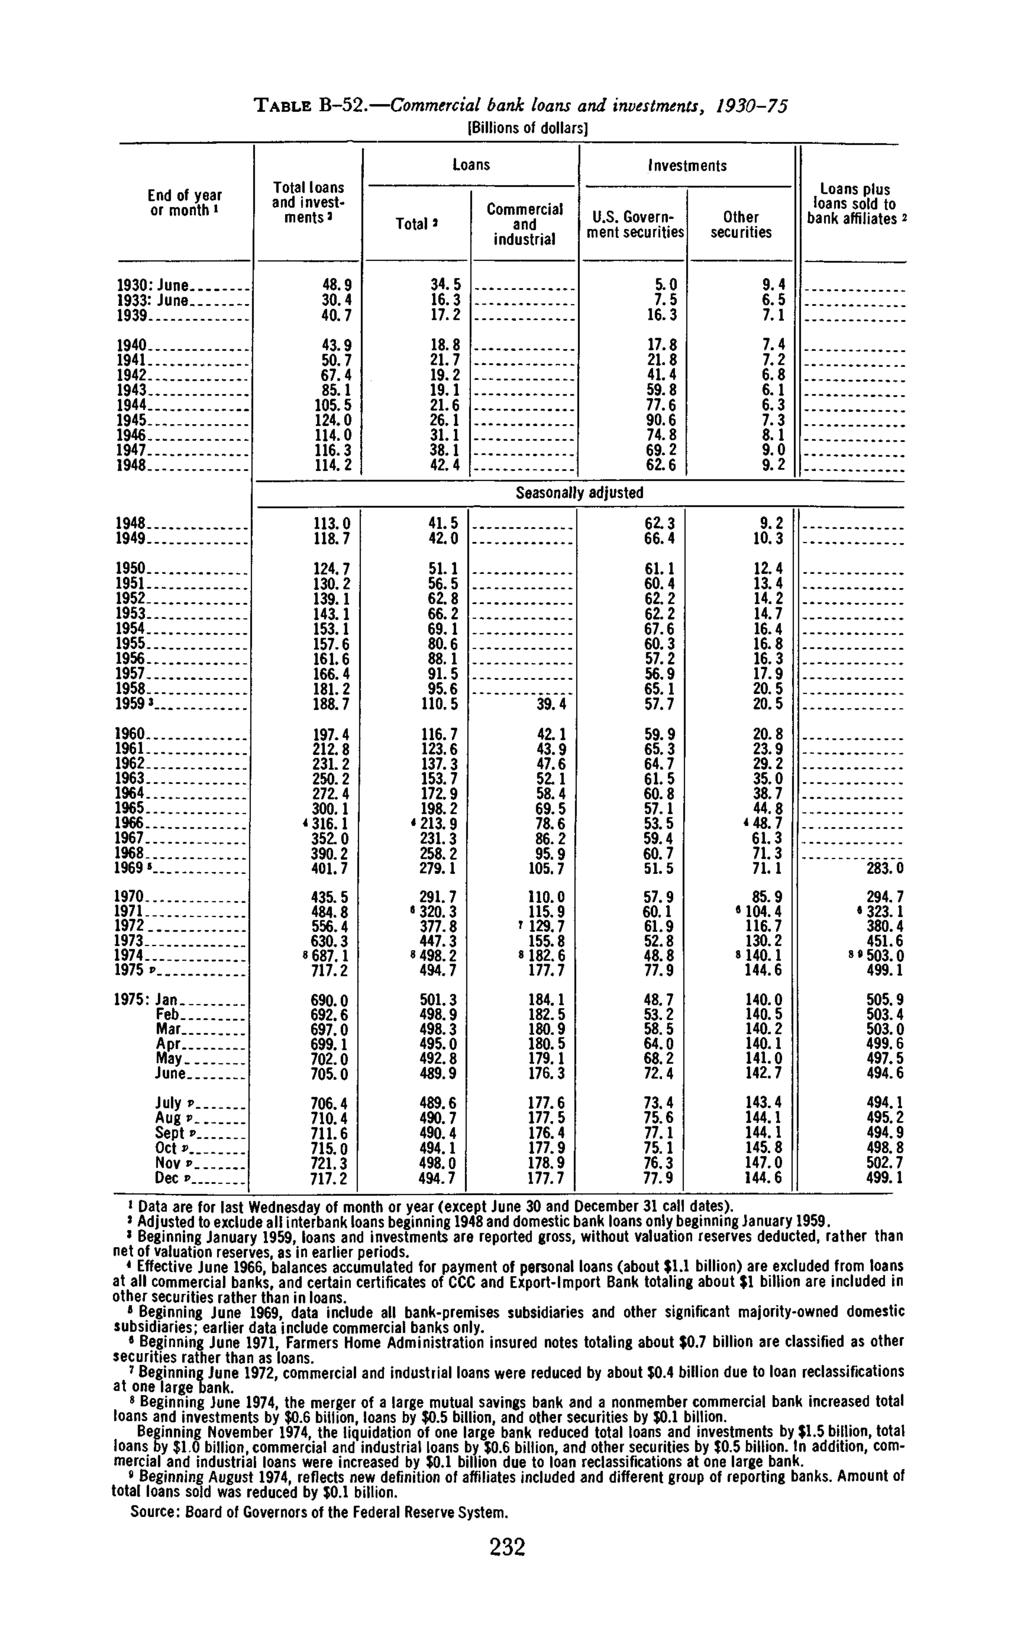 1976 TABLE B-5. bank loans investments, 1930-75 or month 1 investments Total a plus 1930: June......... 19593 I960.... 1975 P 1975: Jan Apr. June Septp Oct* NOVP 1 1 1 19 7.4 4 316. 1 390. 484.